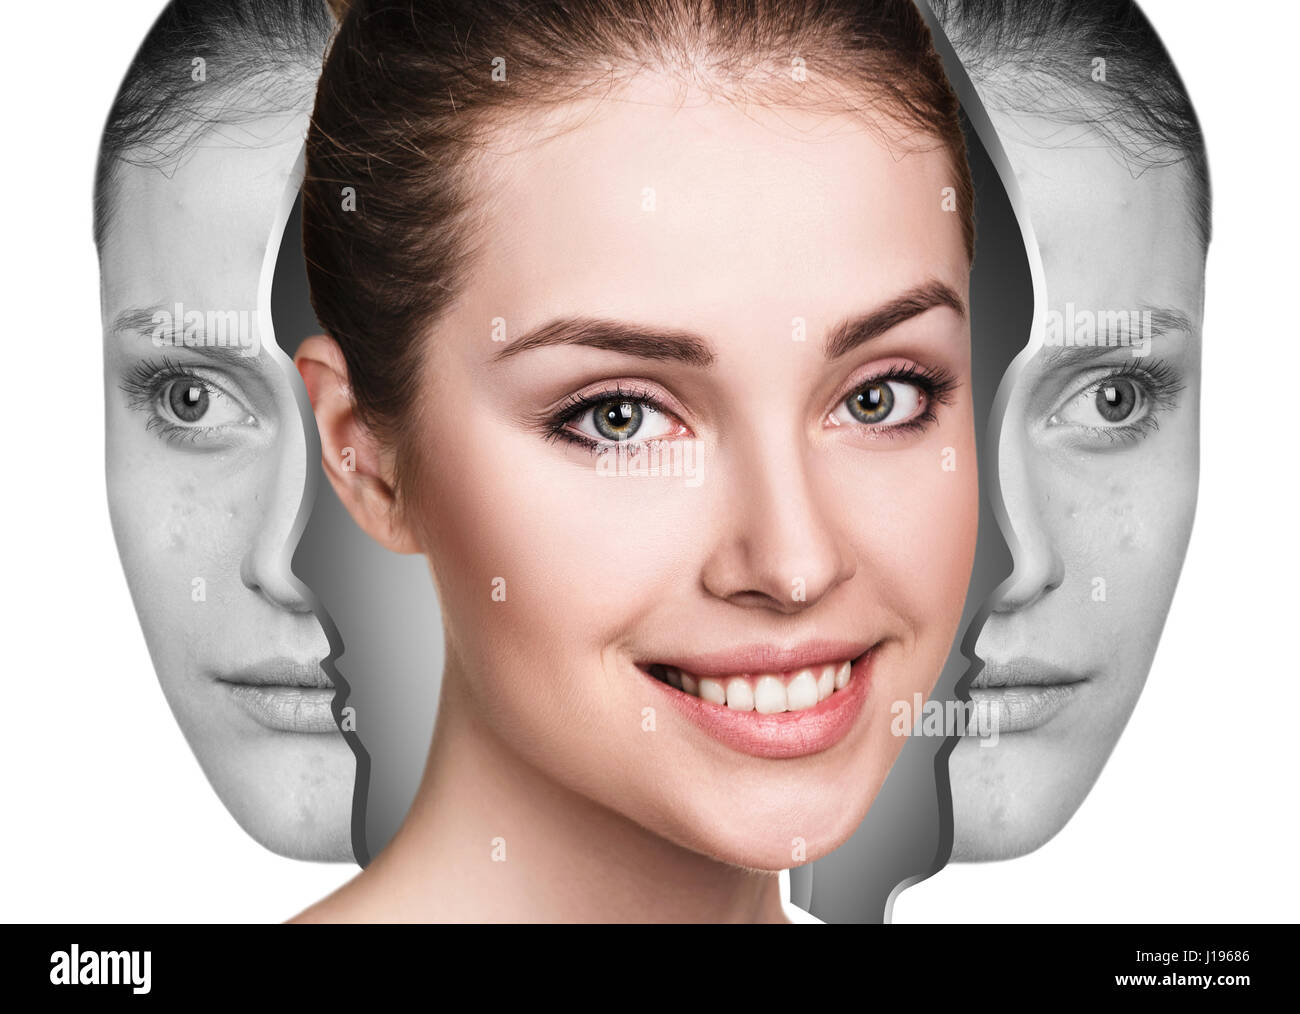 Woman rebirth from bad acne skin to perfect. Stock Photo